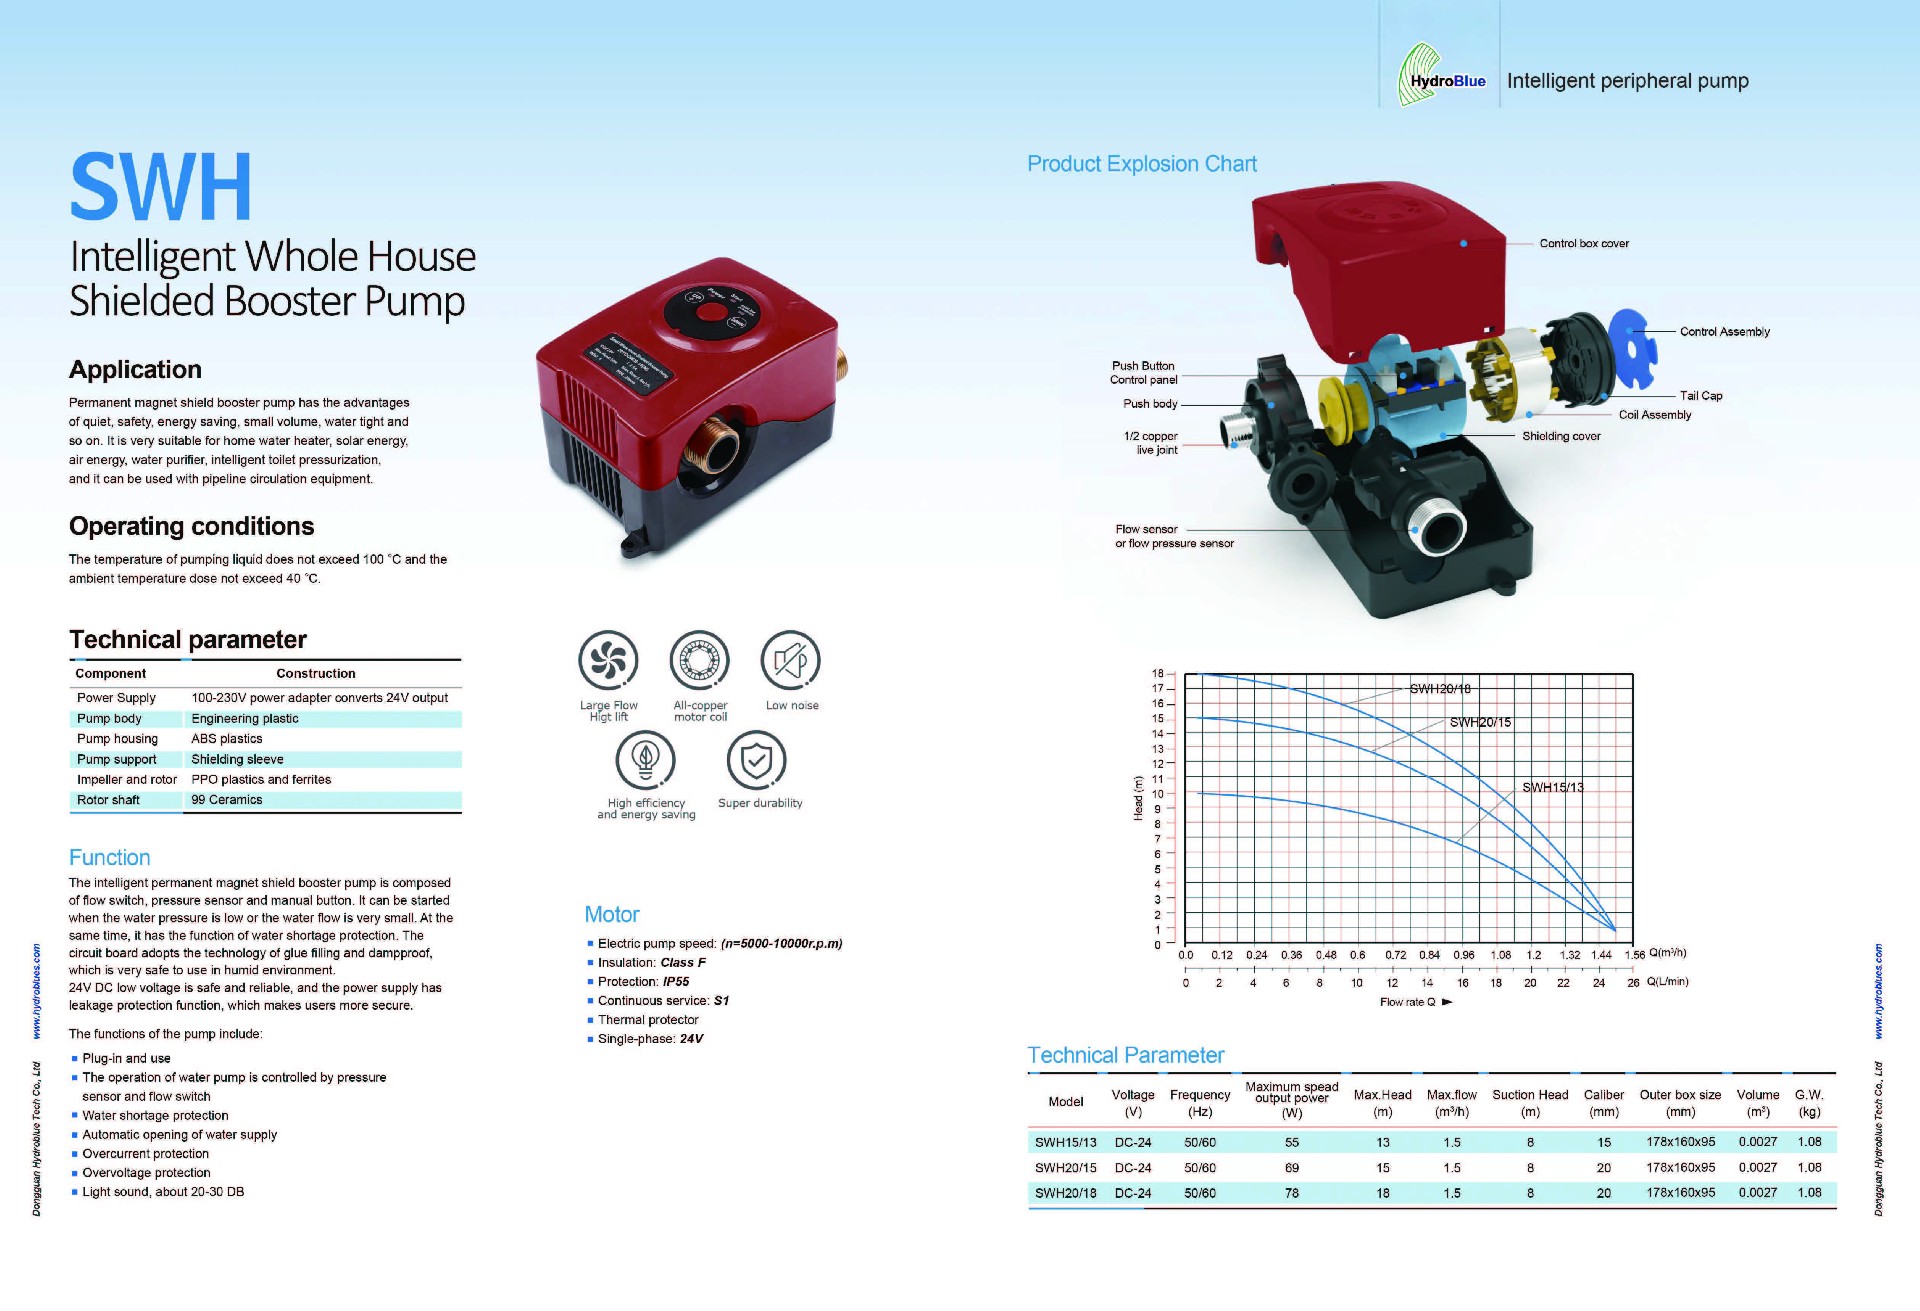 SWH Intelligent Whole House Shielded Booster Pump.jpg